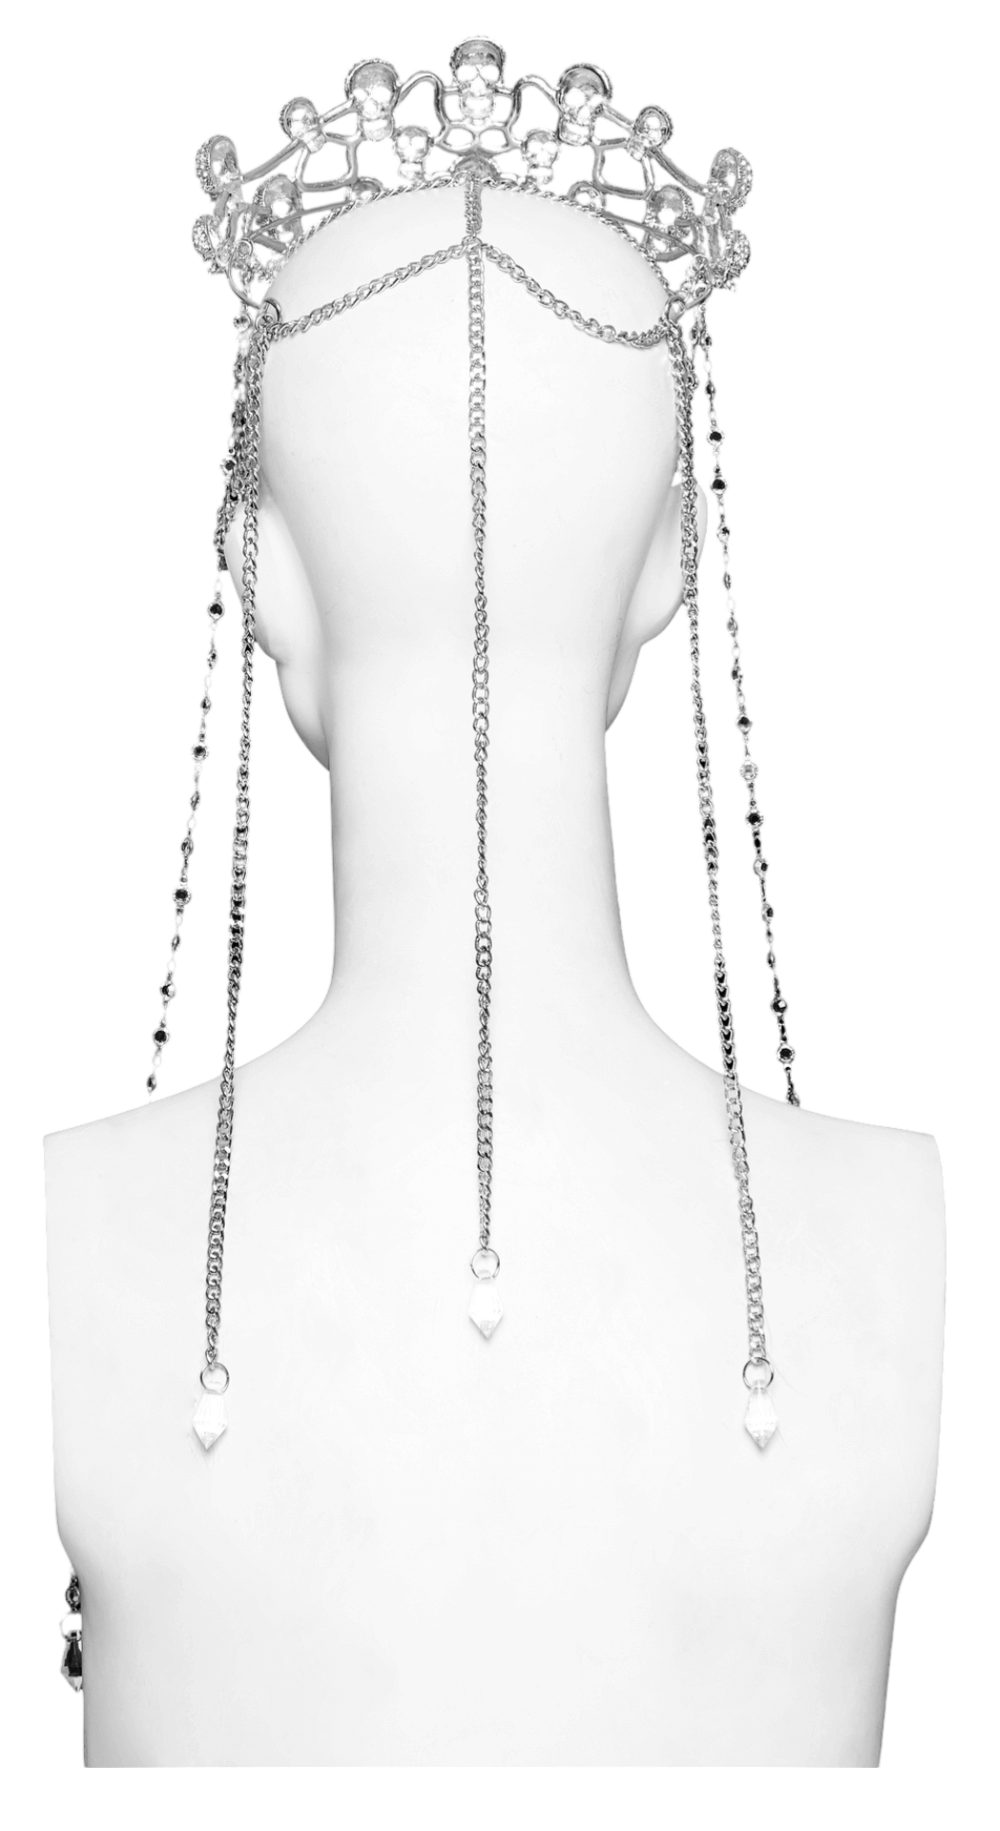 Elegant Gothic Skull Tiara with Chain Accents